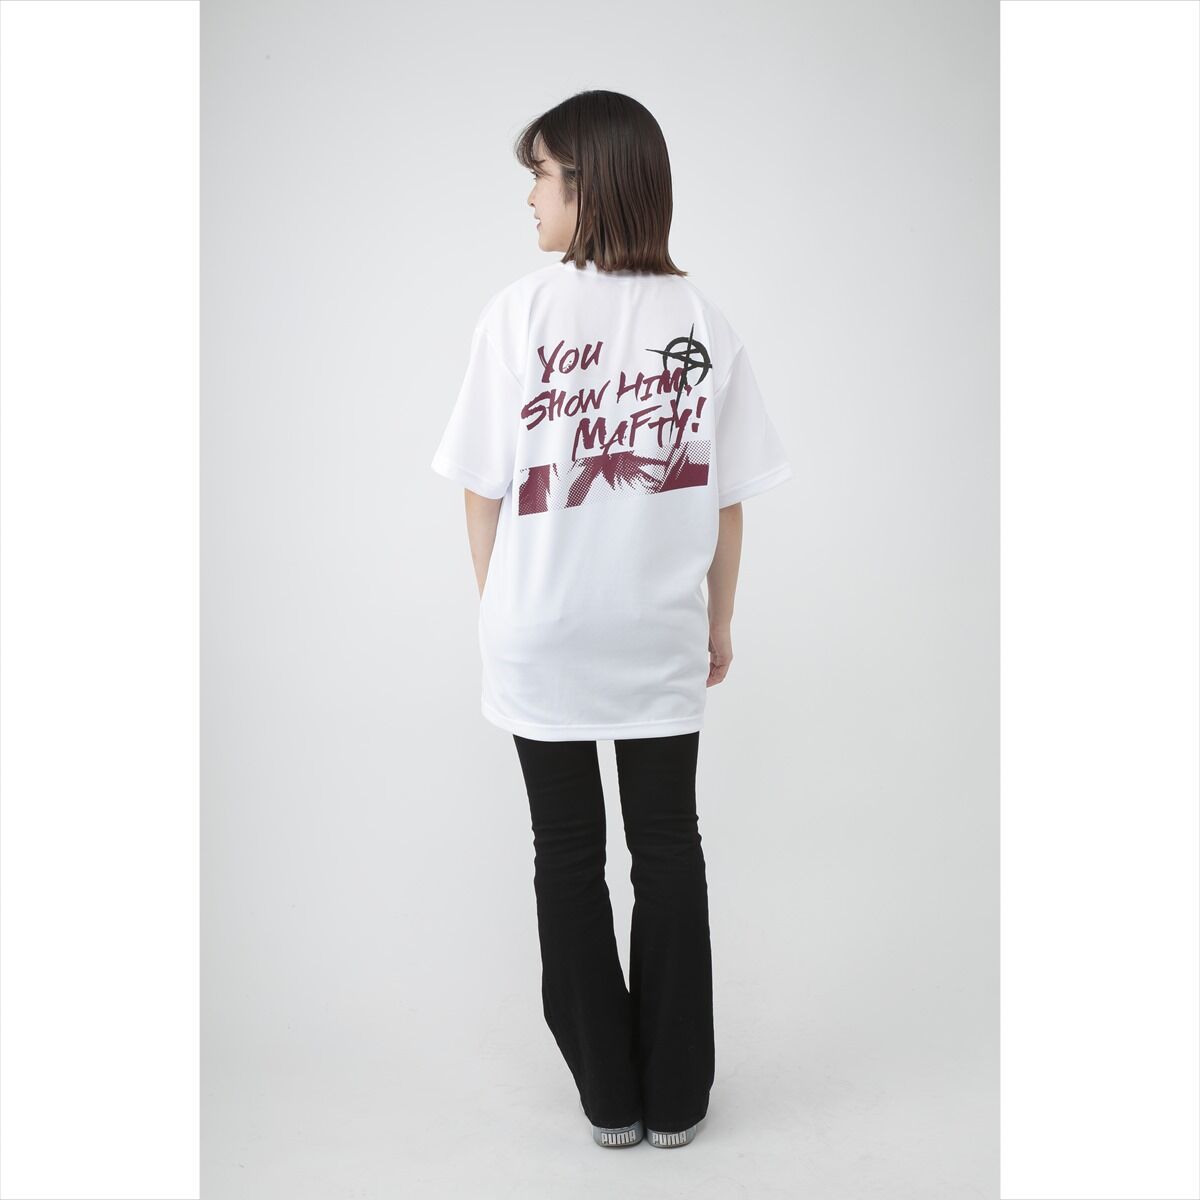 Mobile Suit Gundam Cheer Up Quotes T-shirt